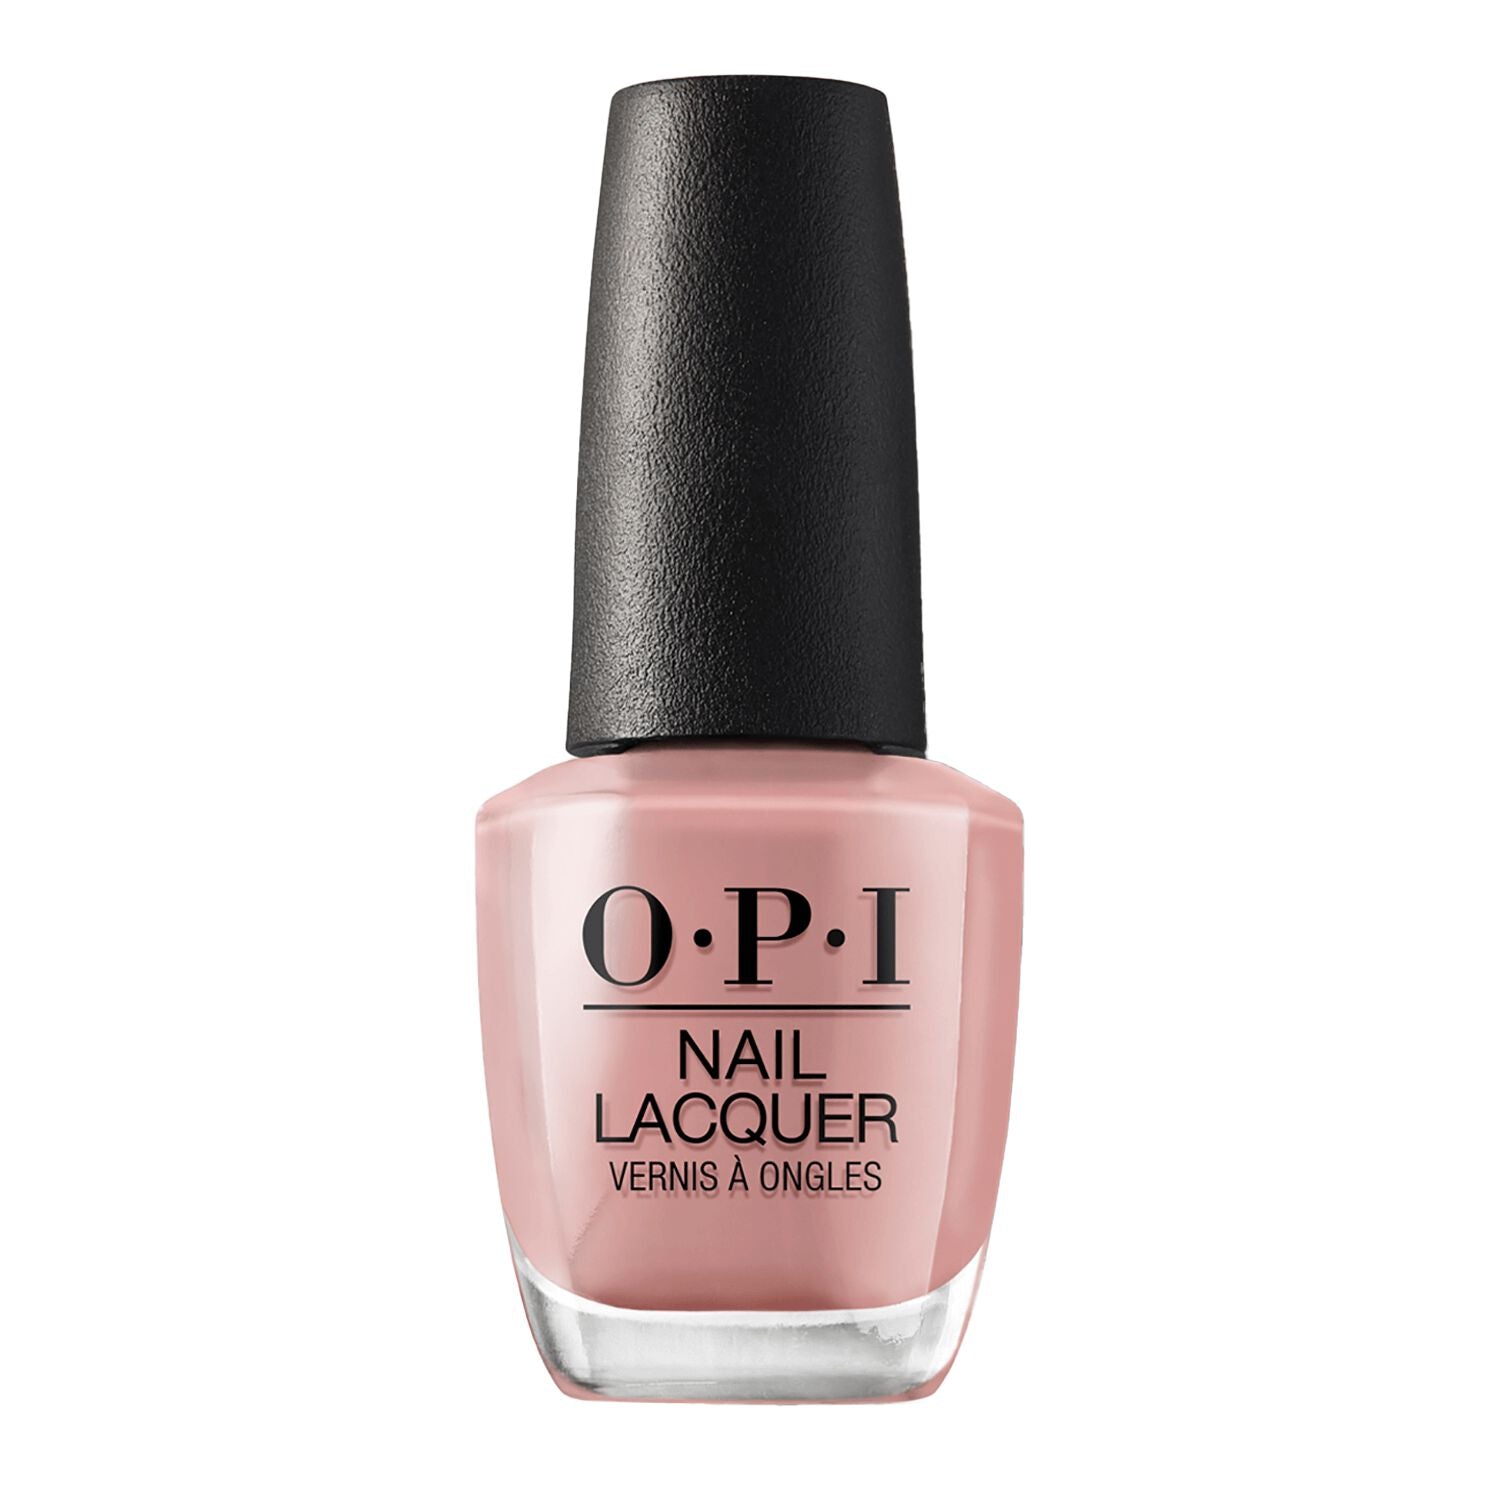 OPI Barefoot in Barcelona Nail Lacquer